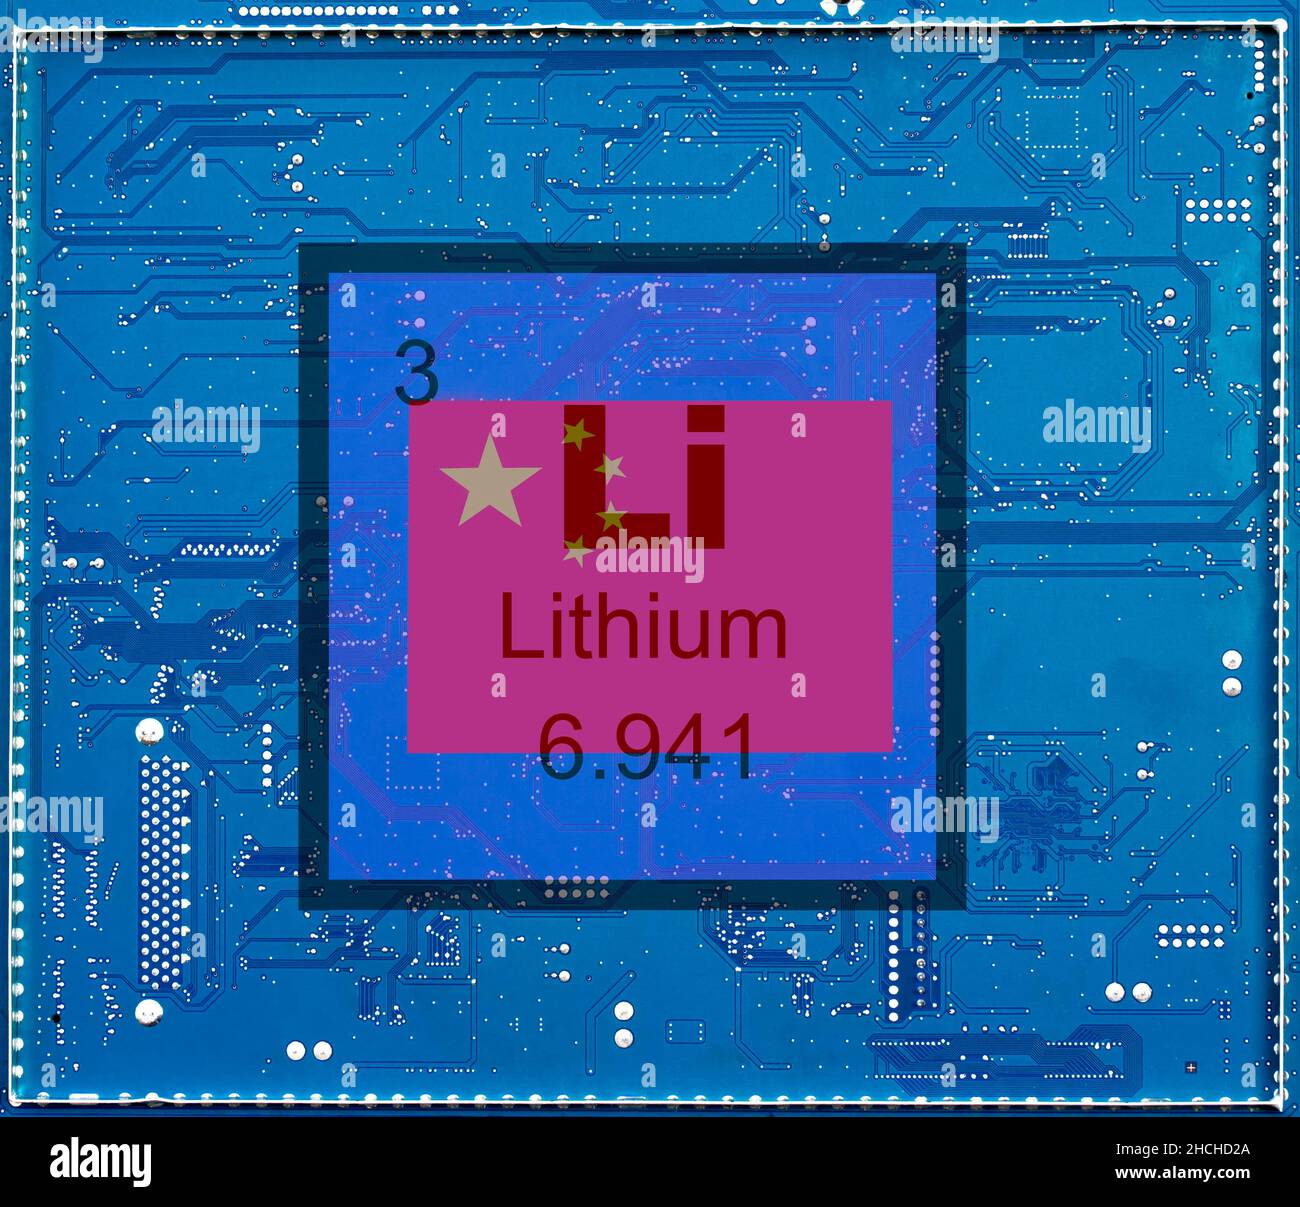 Lithium Chemical element with the symbol Li and atomic number 3 Stock Photo